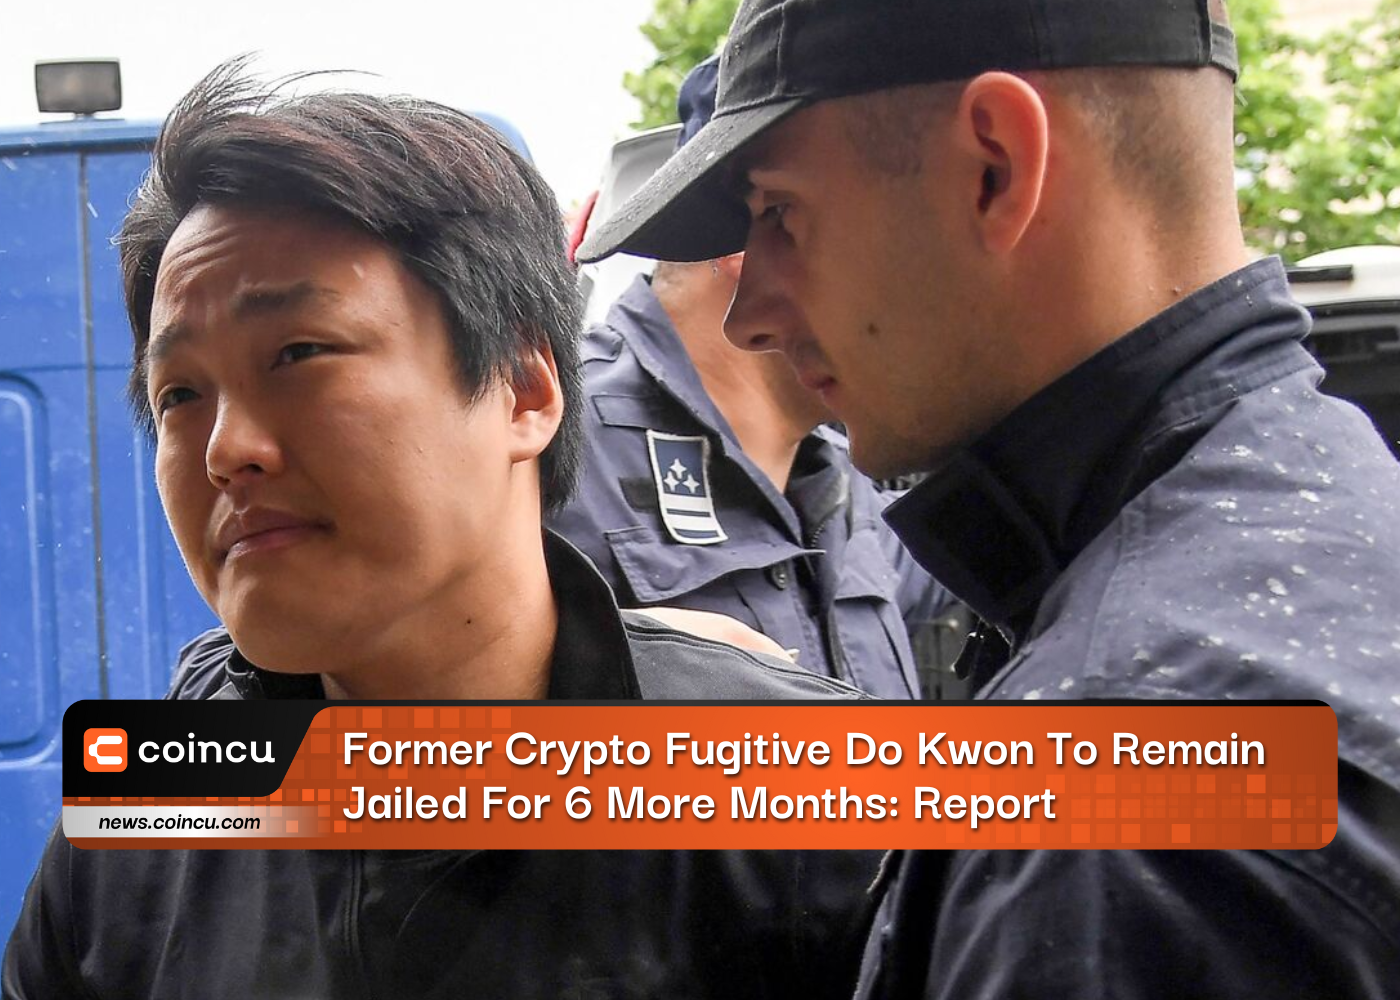 Former Crypto Fugitive Do Kwon To Remain Jailed For 6 More Months: Report